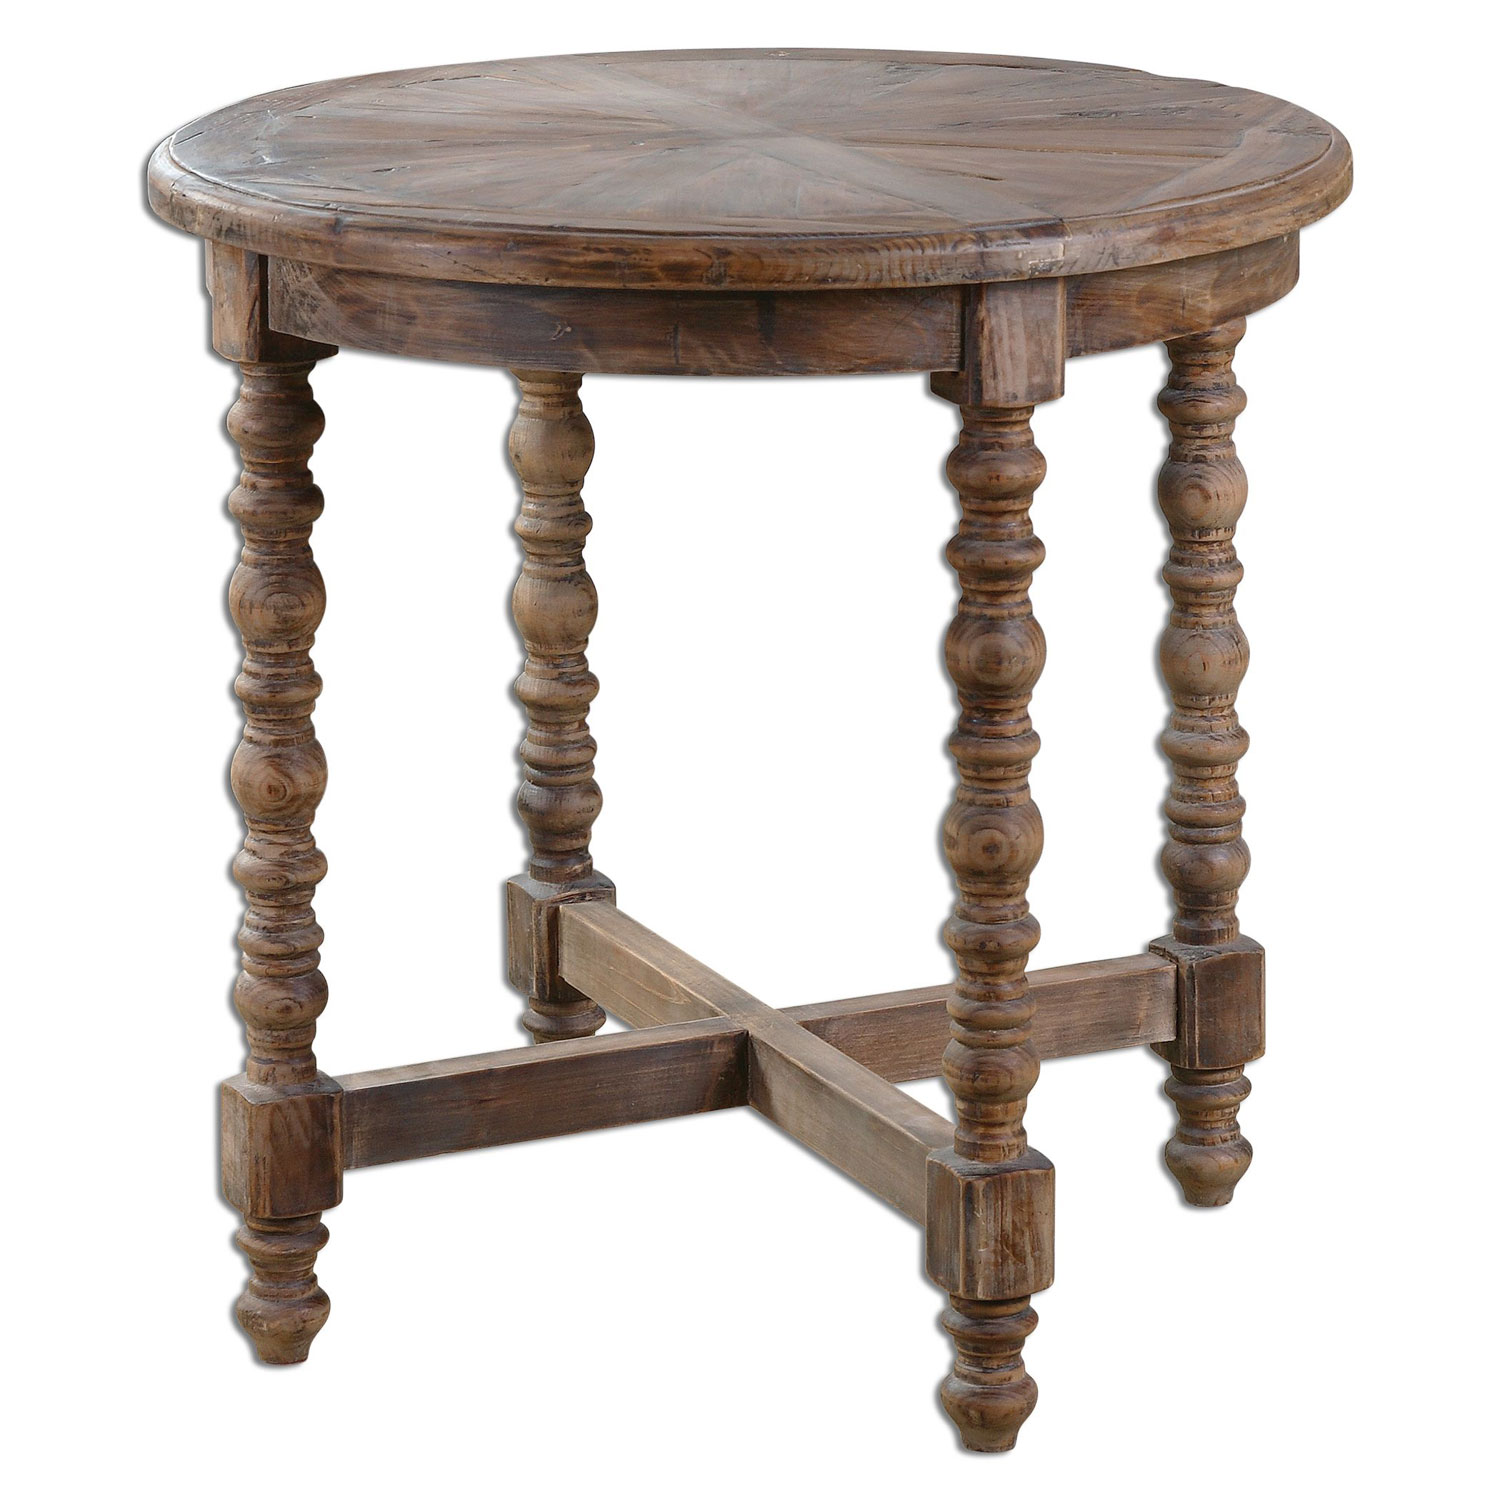 uttermost samuelle reclaimed fir wood end table bellacor round accent hover zoom the brick coffee tables bathroom makeovers pub height kitchen granite console target dining and